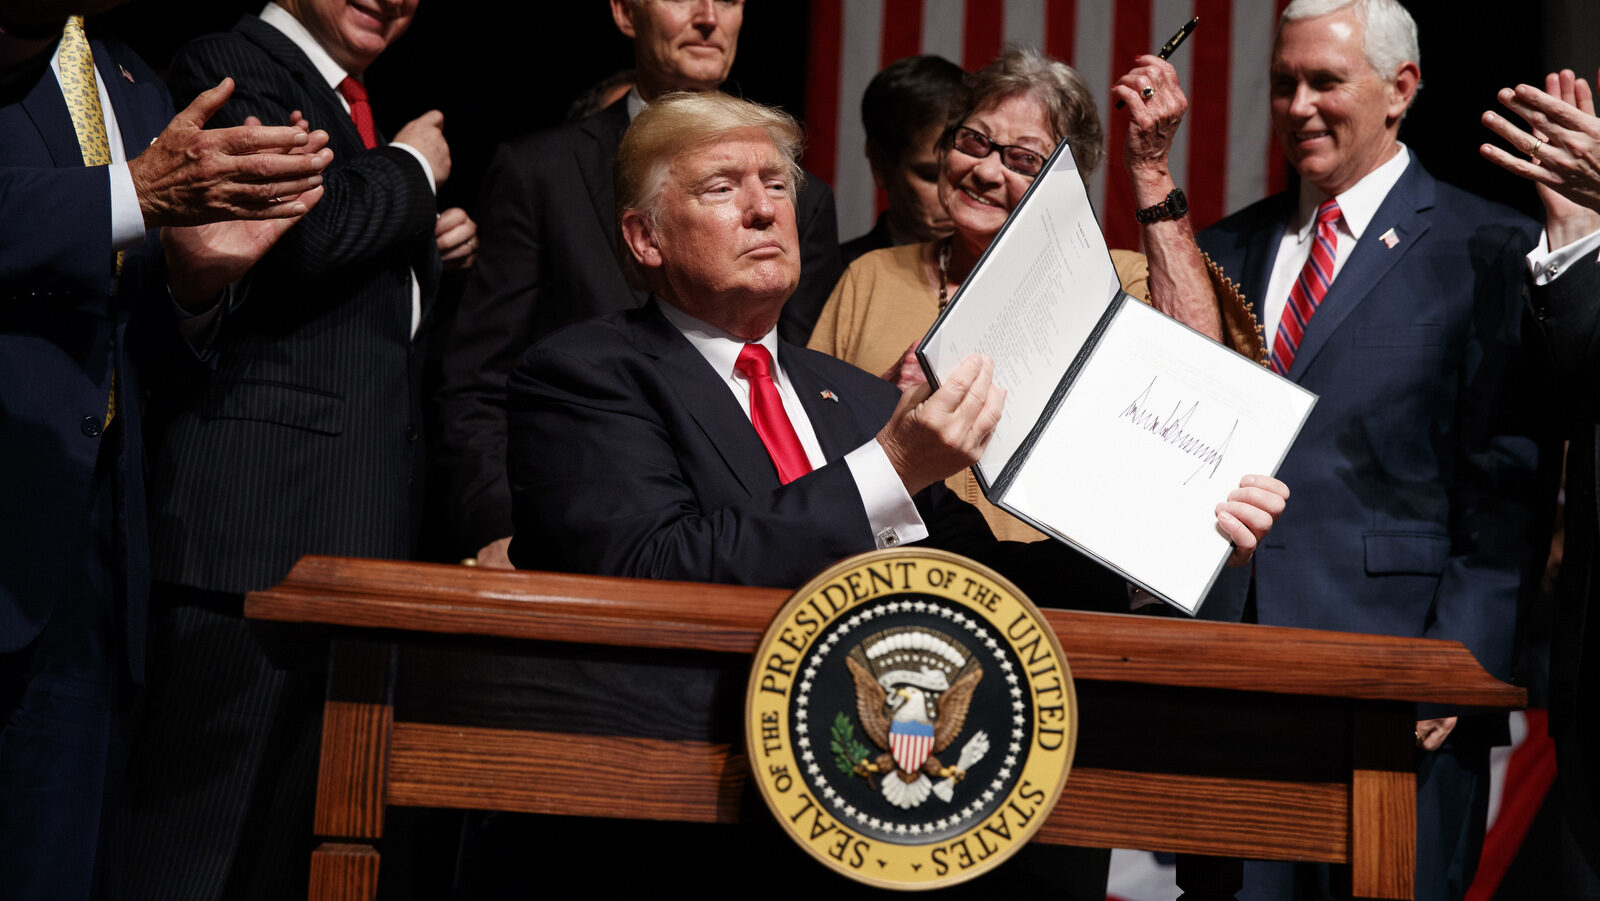 President Donald Trump shows a signed executive order on Cuba policy, Friday, June 16, 2017, in Miami. From left are, Rep, Mario Diaz-Balart, R-Fla., Florida Gov. Rock Scott, Cary Roque, and Vice President Mike Pence. (AP Photo/Evan Vucci)